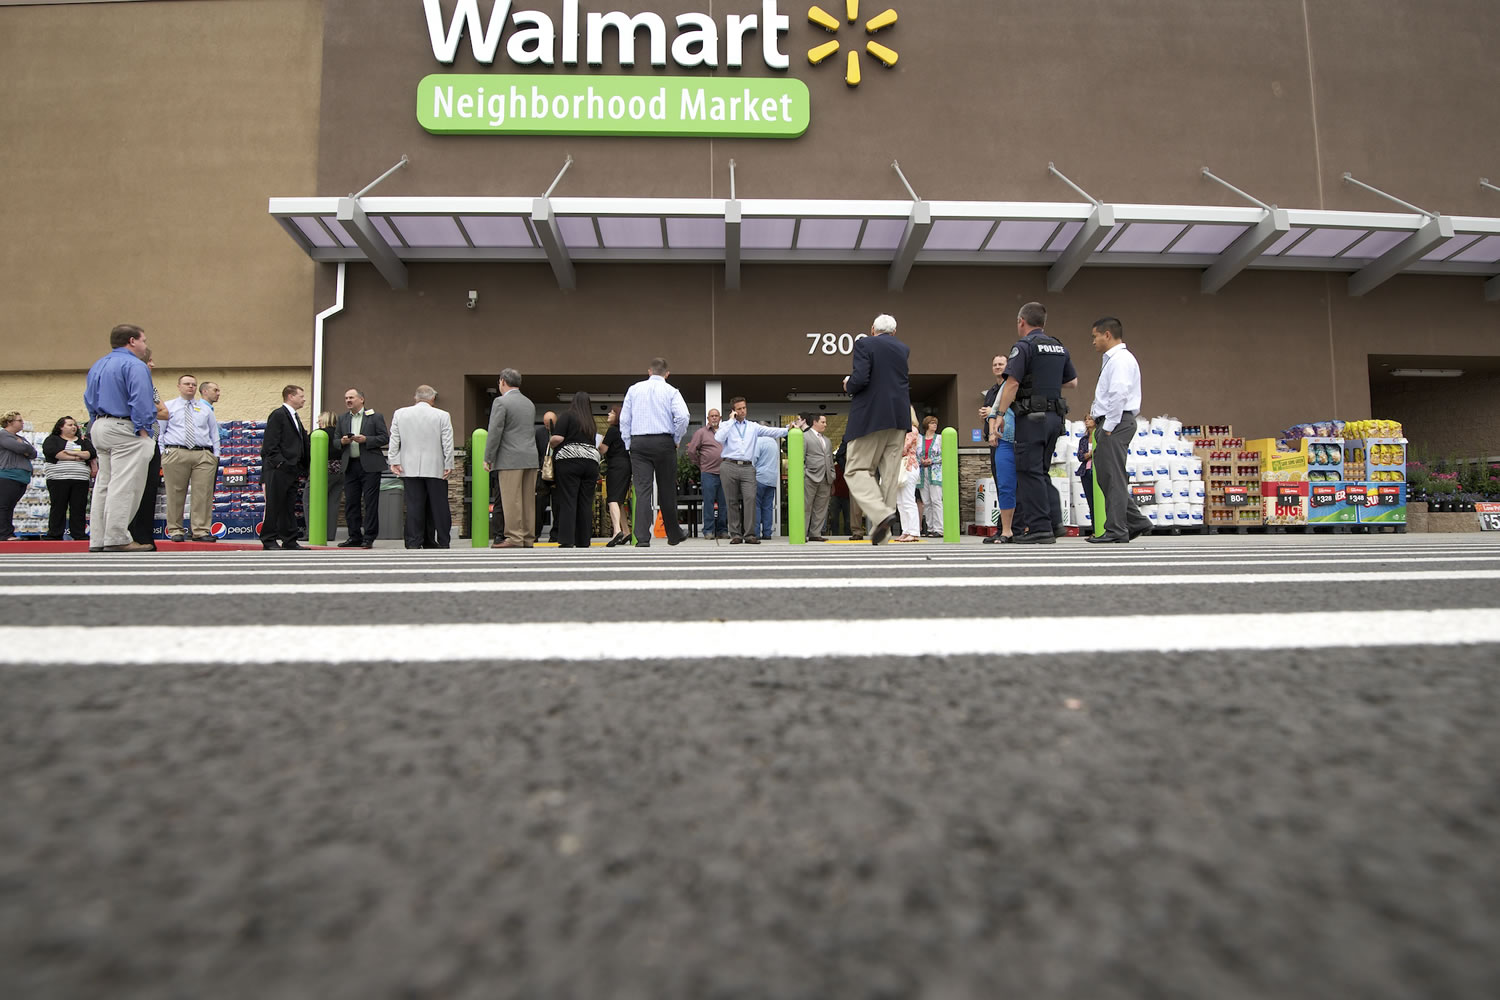 City of Vancouver officials, community members and representatives of Walmart attended a grand opening ceremony today for Wal-Mart's first local Neighborhood Market grocery store.